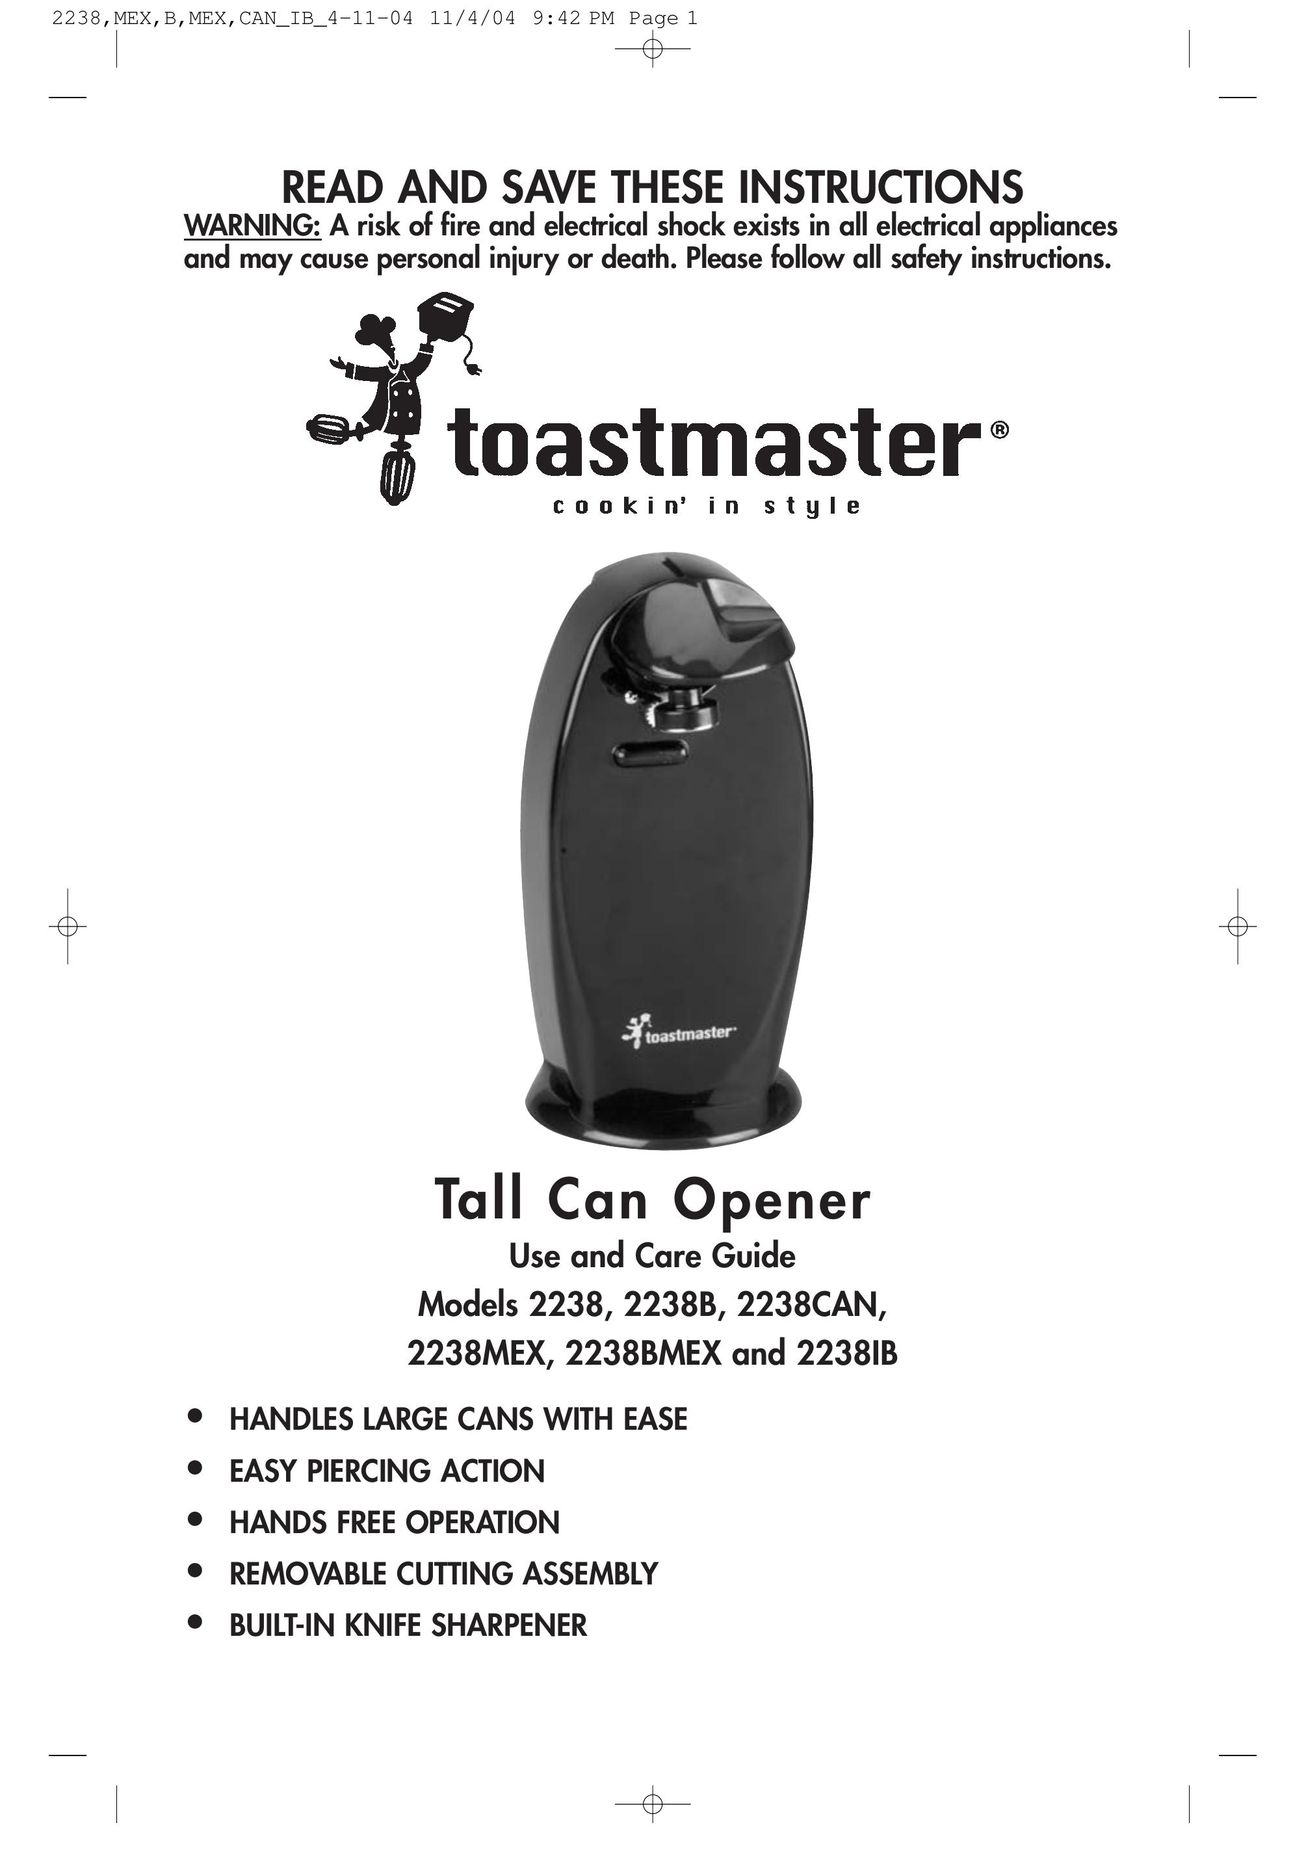 Toastmaster 2238BMEX Can Opener User Manual